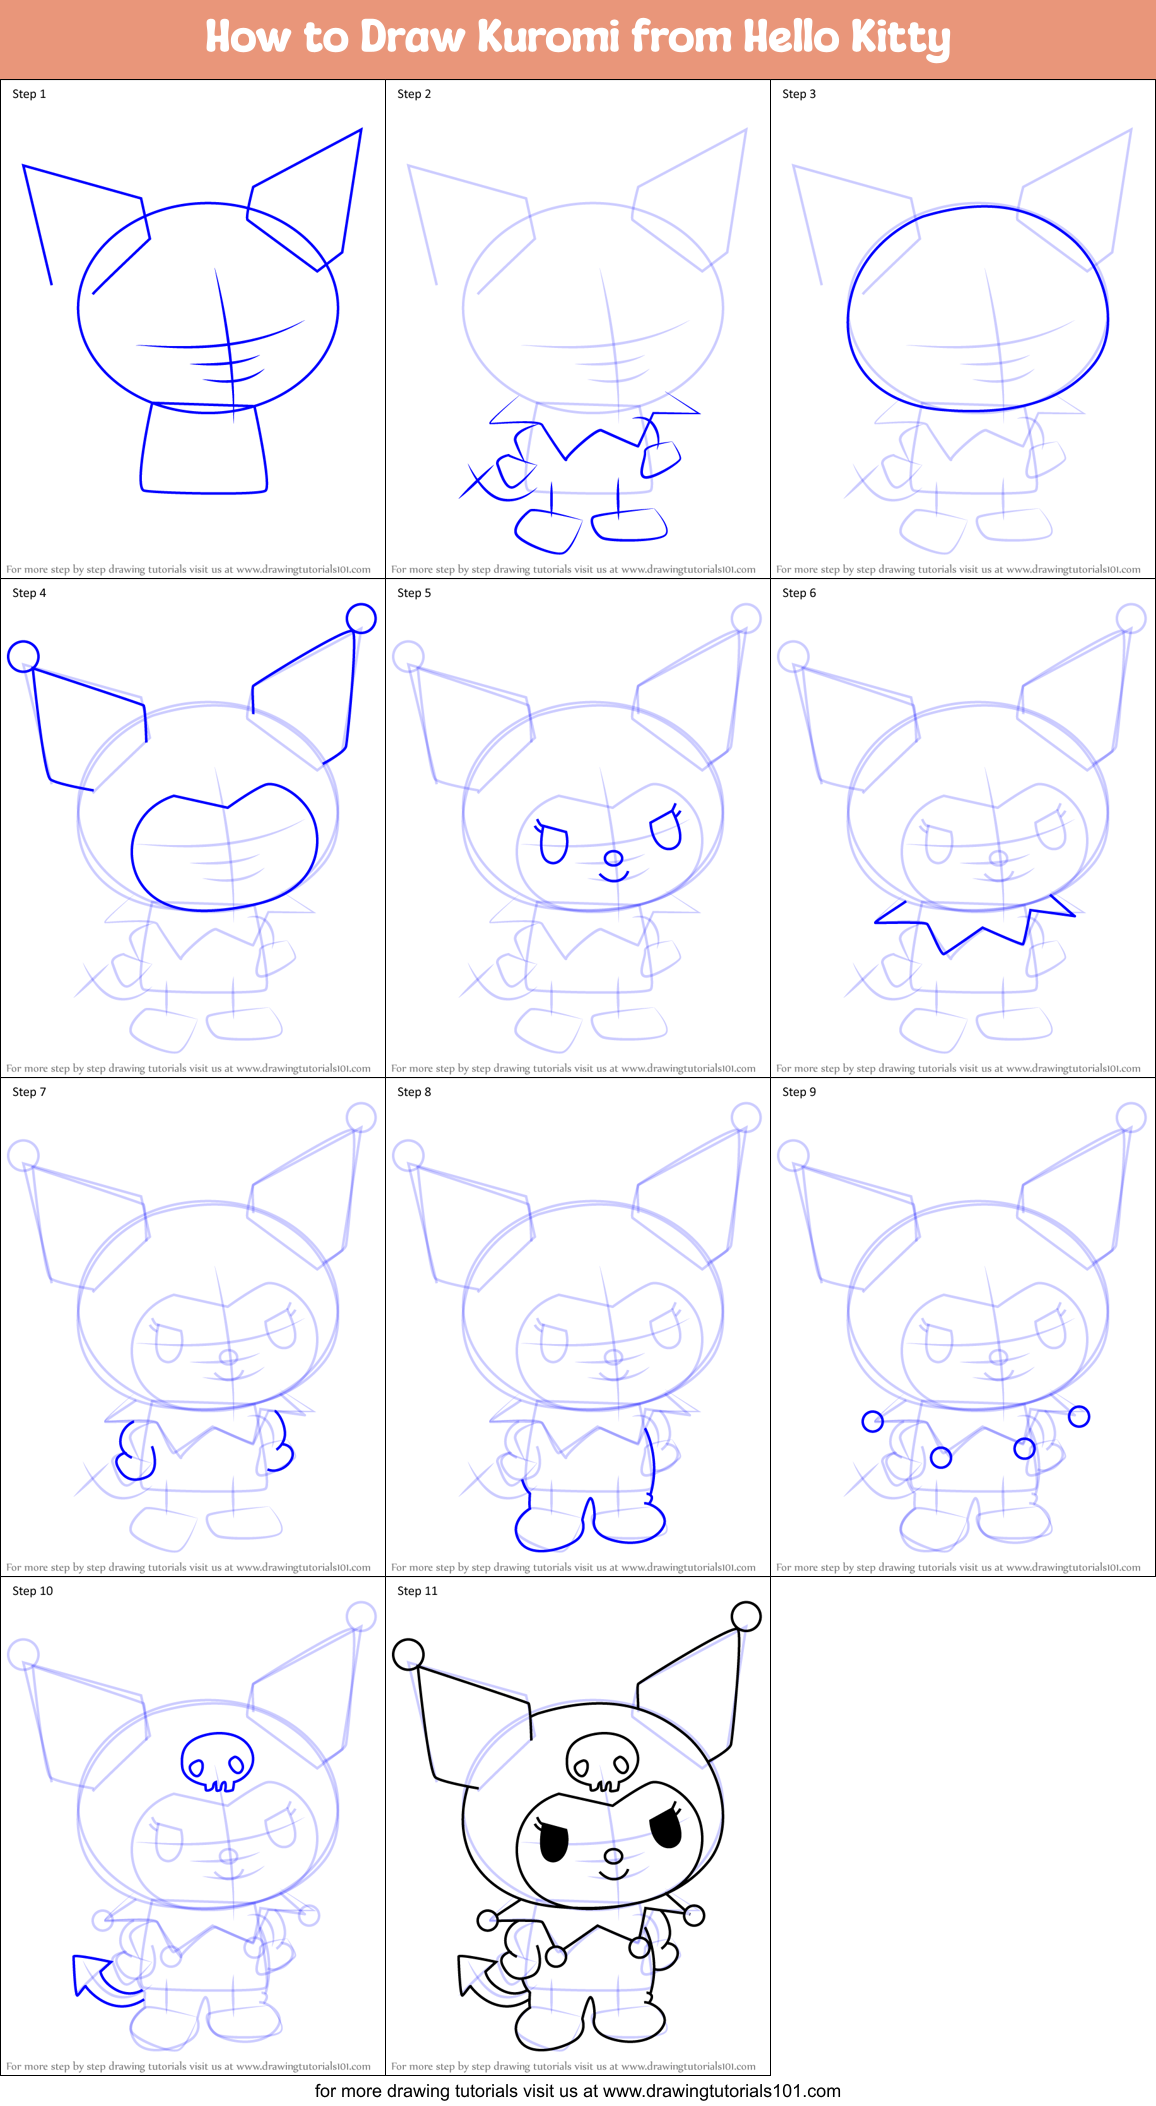 How to Draw Kuromi from Hello Kitty (Hello Kitty) Step by Step ...